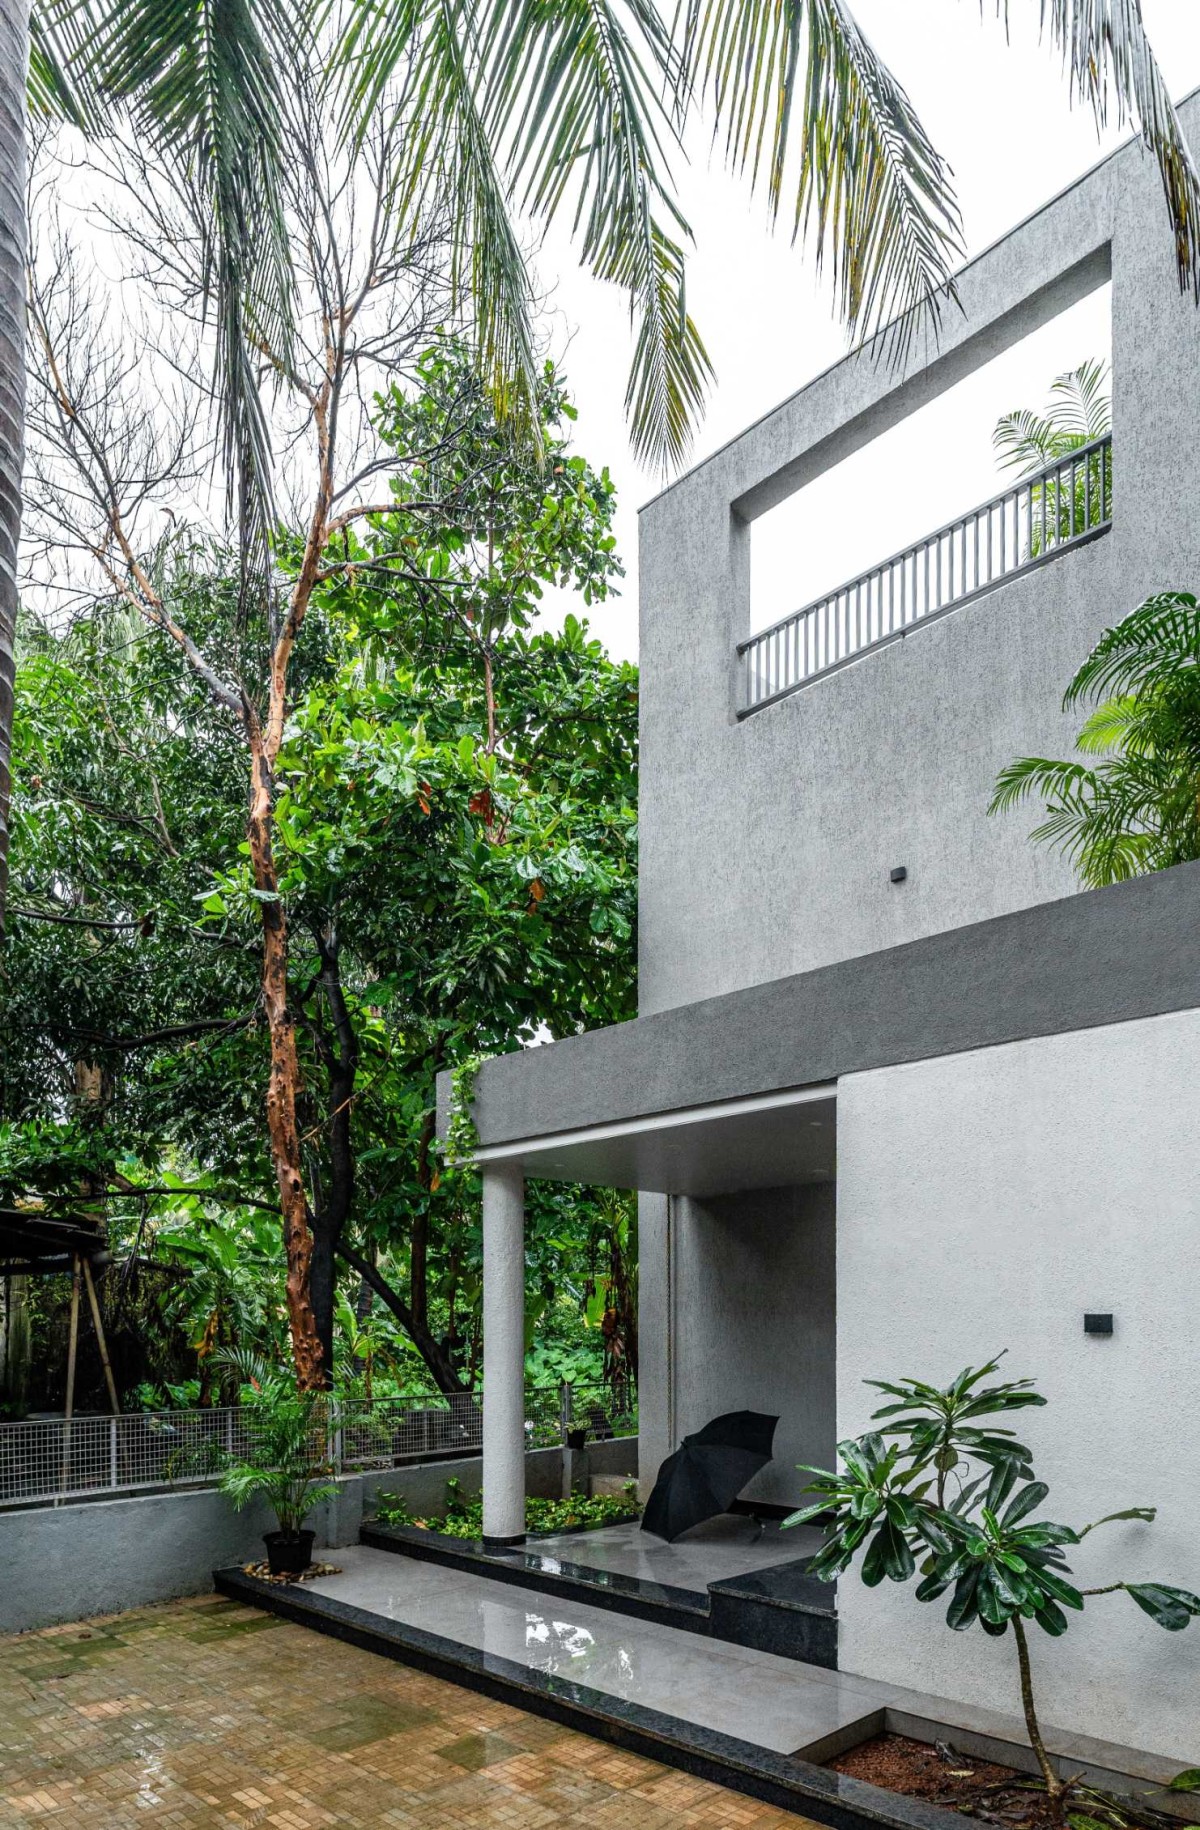 View featuring porch and Terrace area of Sukoon by the Subtle Studio